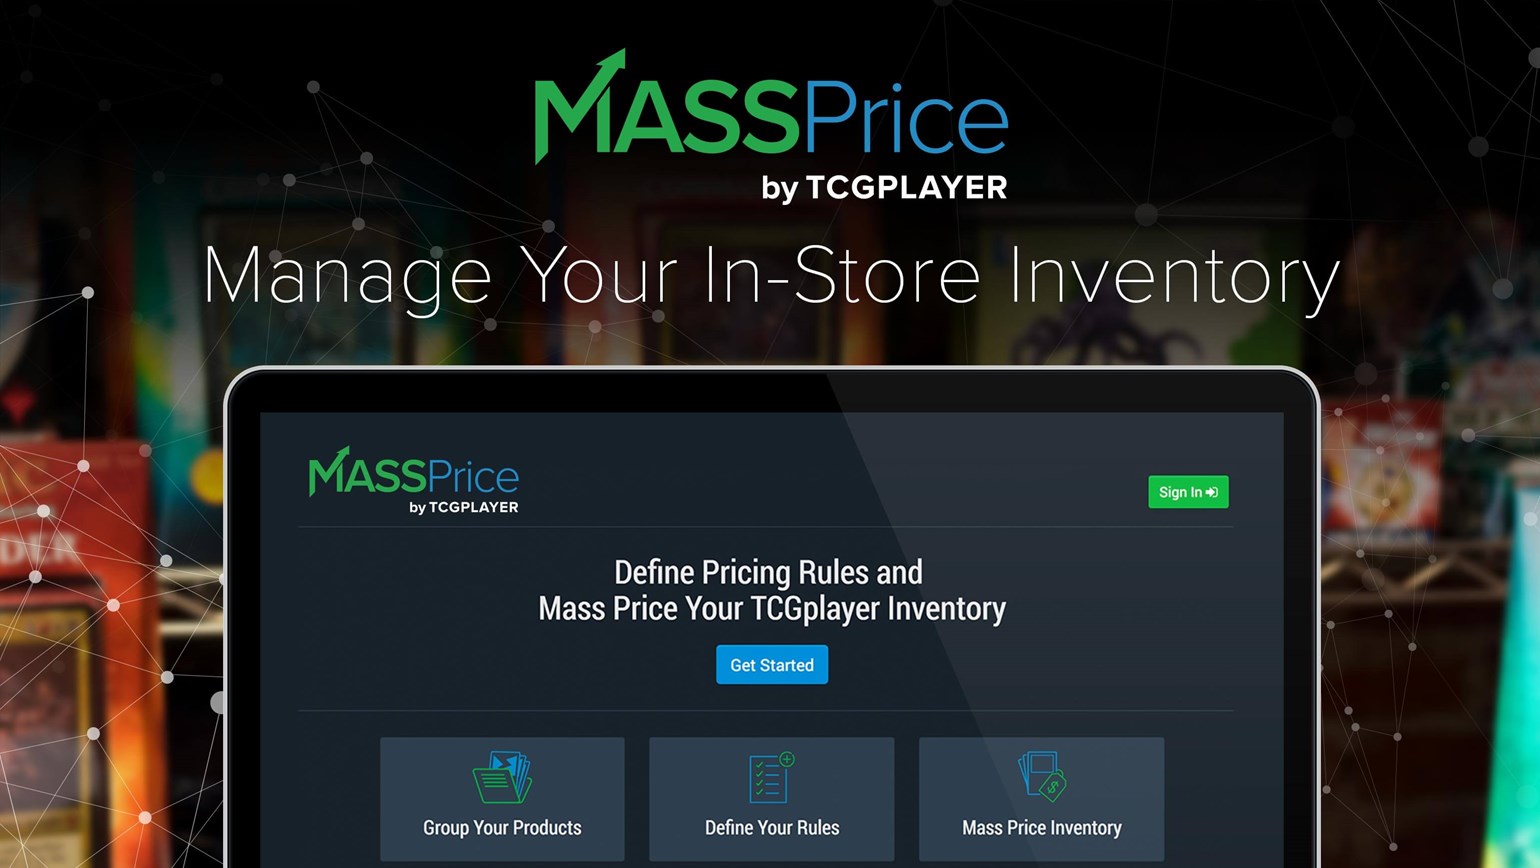 Manage Your In-Store Inventory with New MassPrice Functionality